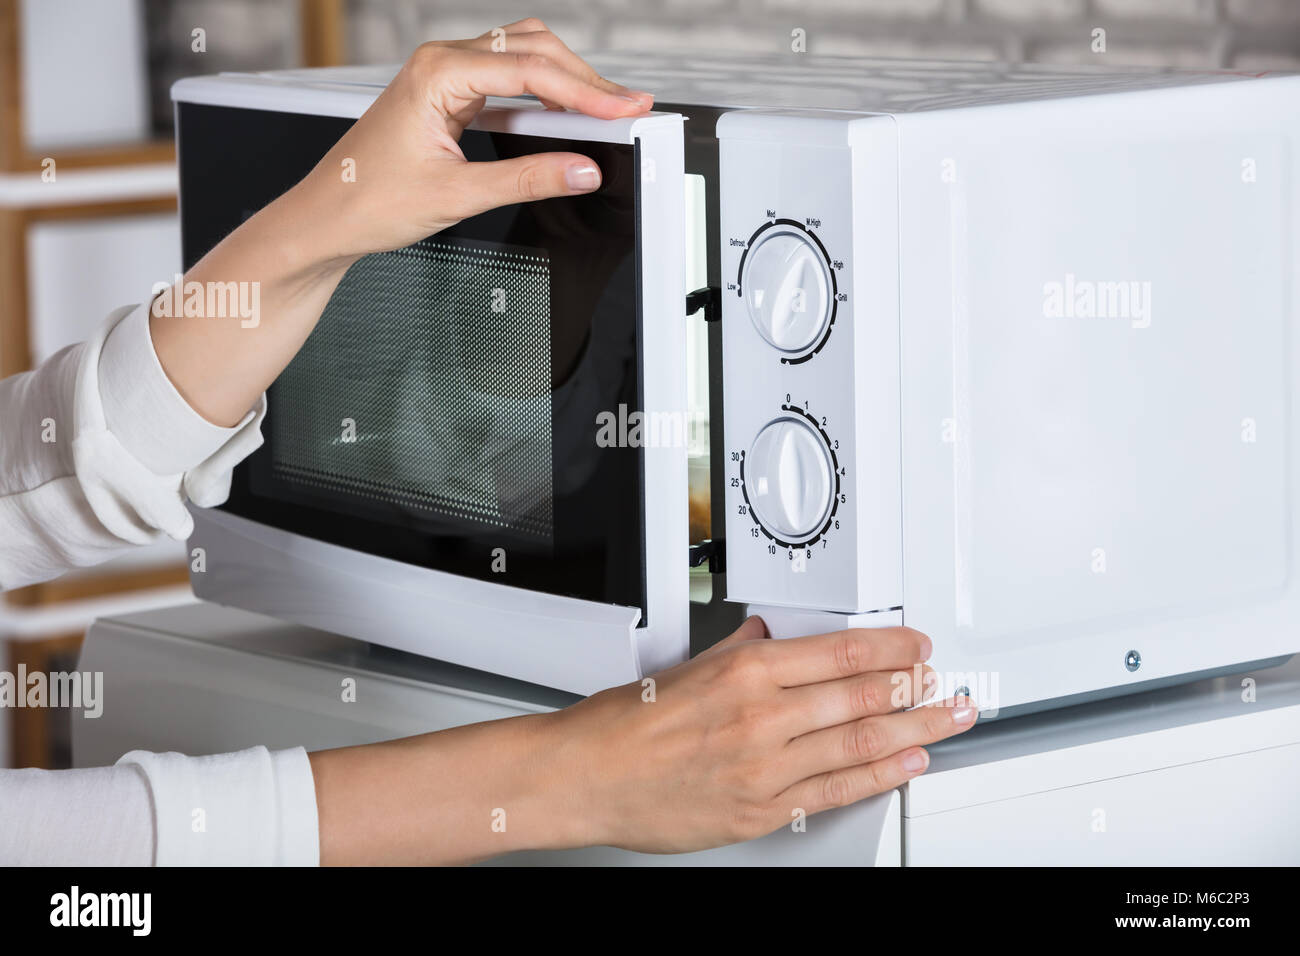 Woman's Hands Closing Microwave Oven Door And Preparing Food At Home Stock Photo